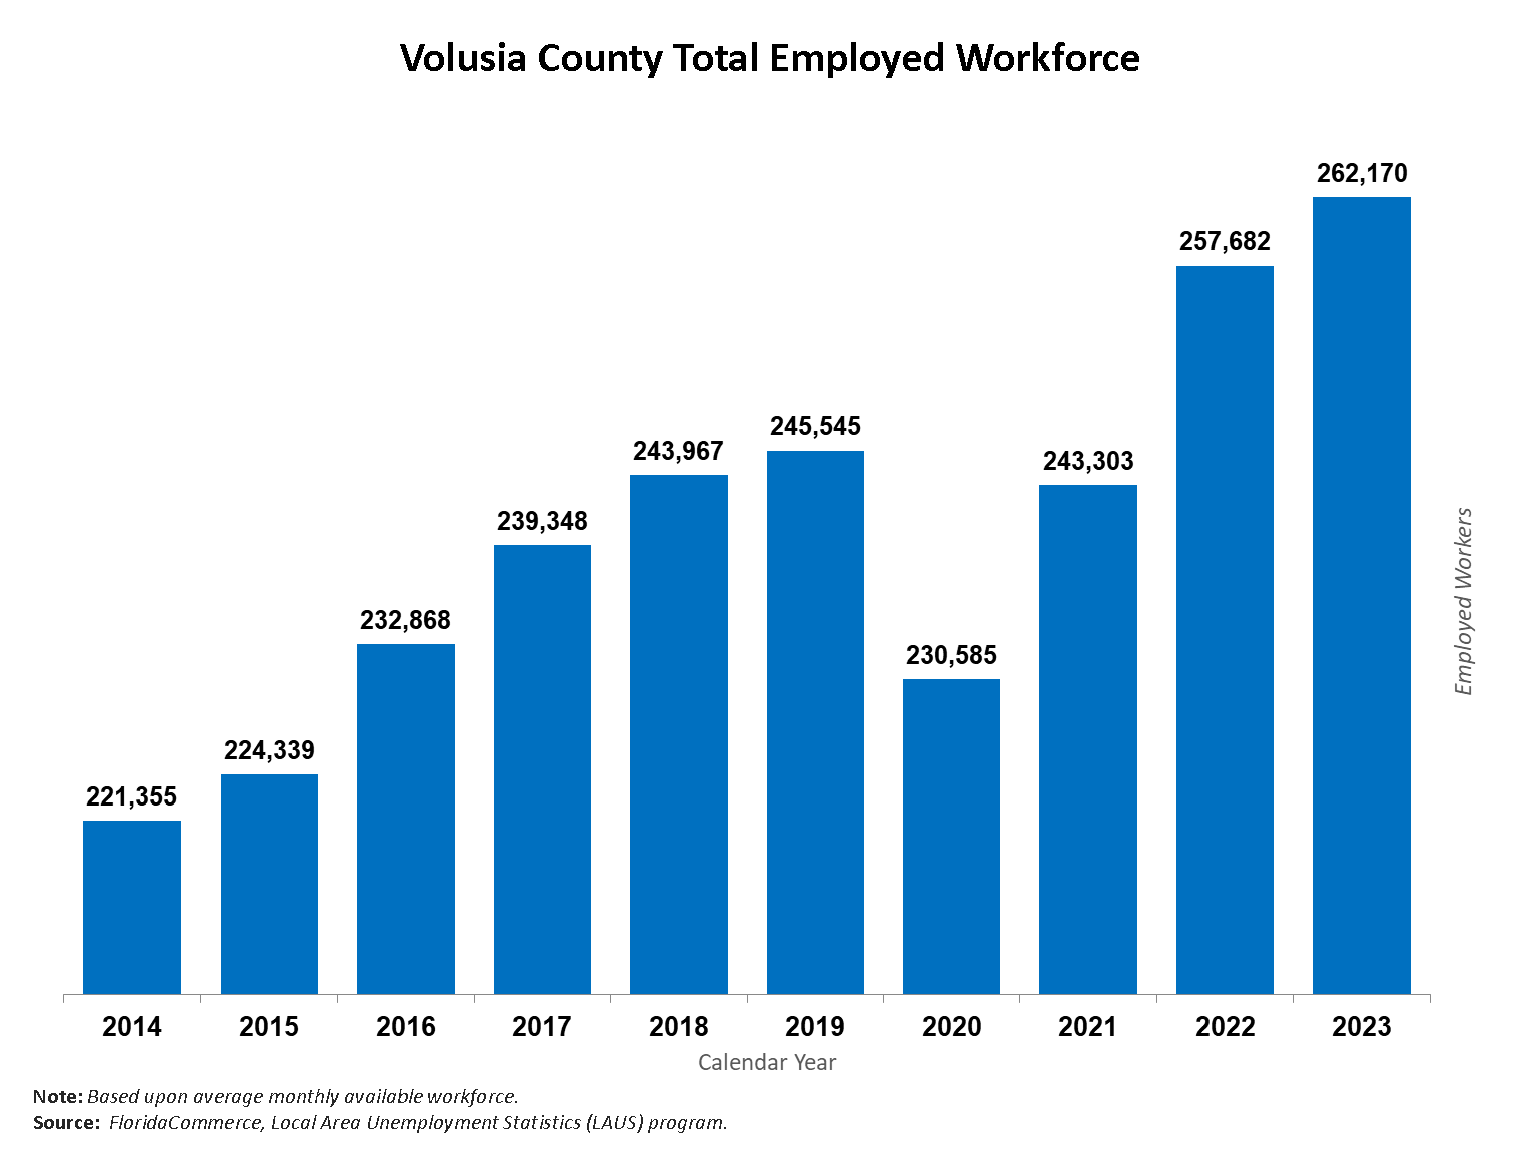 Volusia County Total Employed workforce